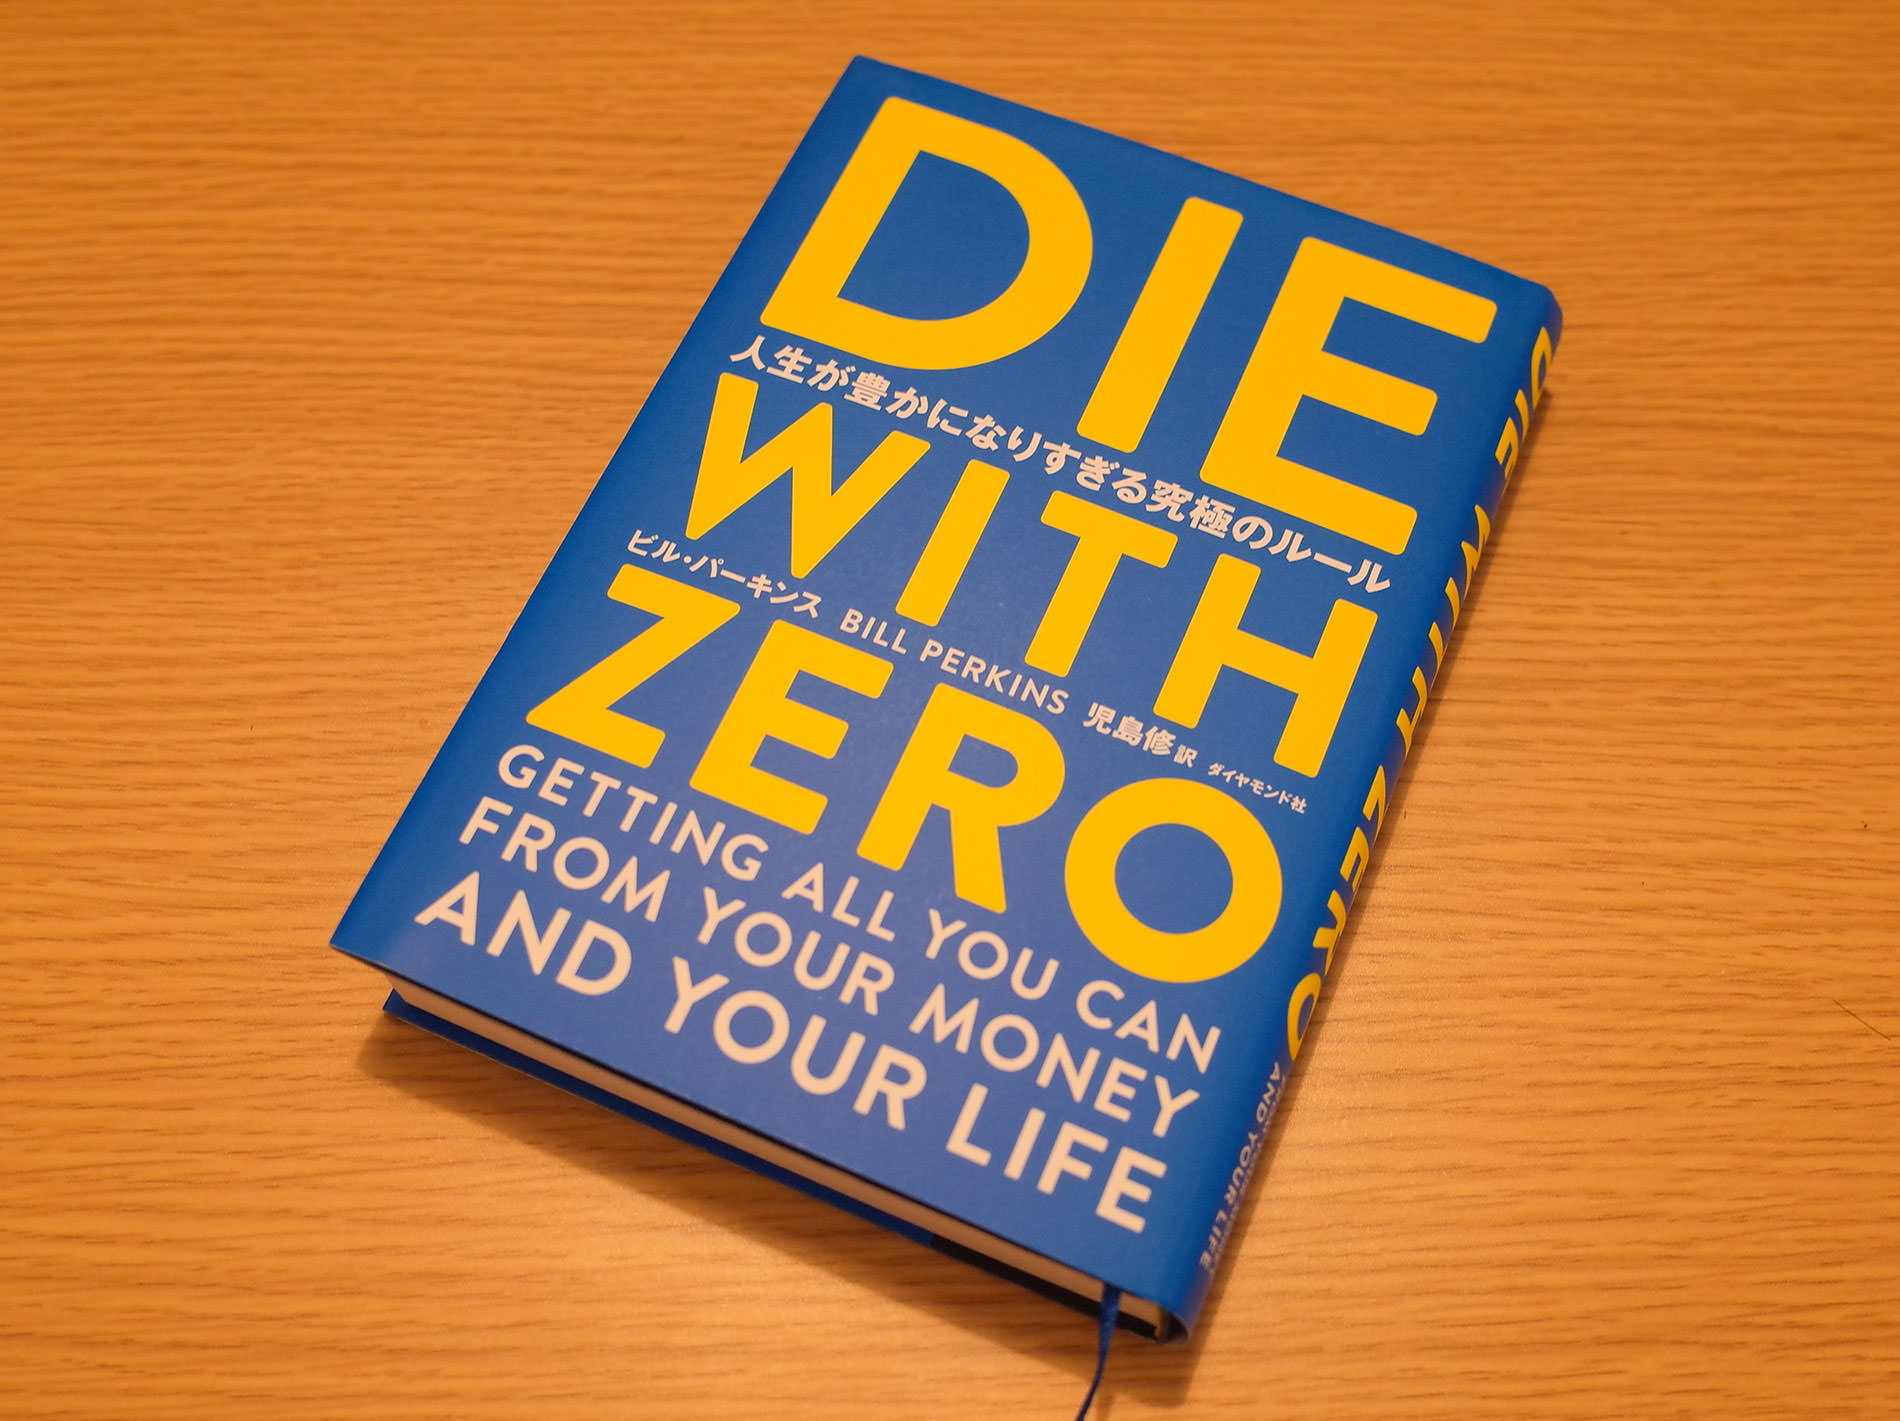 DIE WITH ZERO 人生が豊かになりすぎる究極のルール / Die with Zero: Getting All You Can from Your Money and Your Life